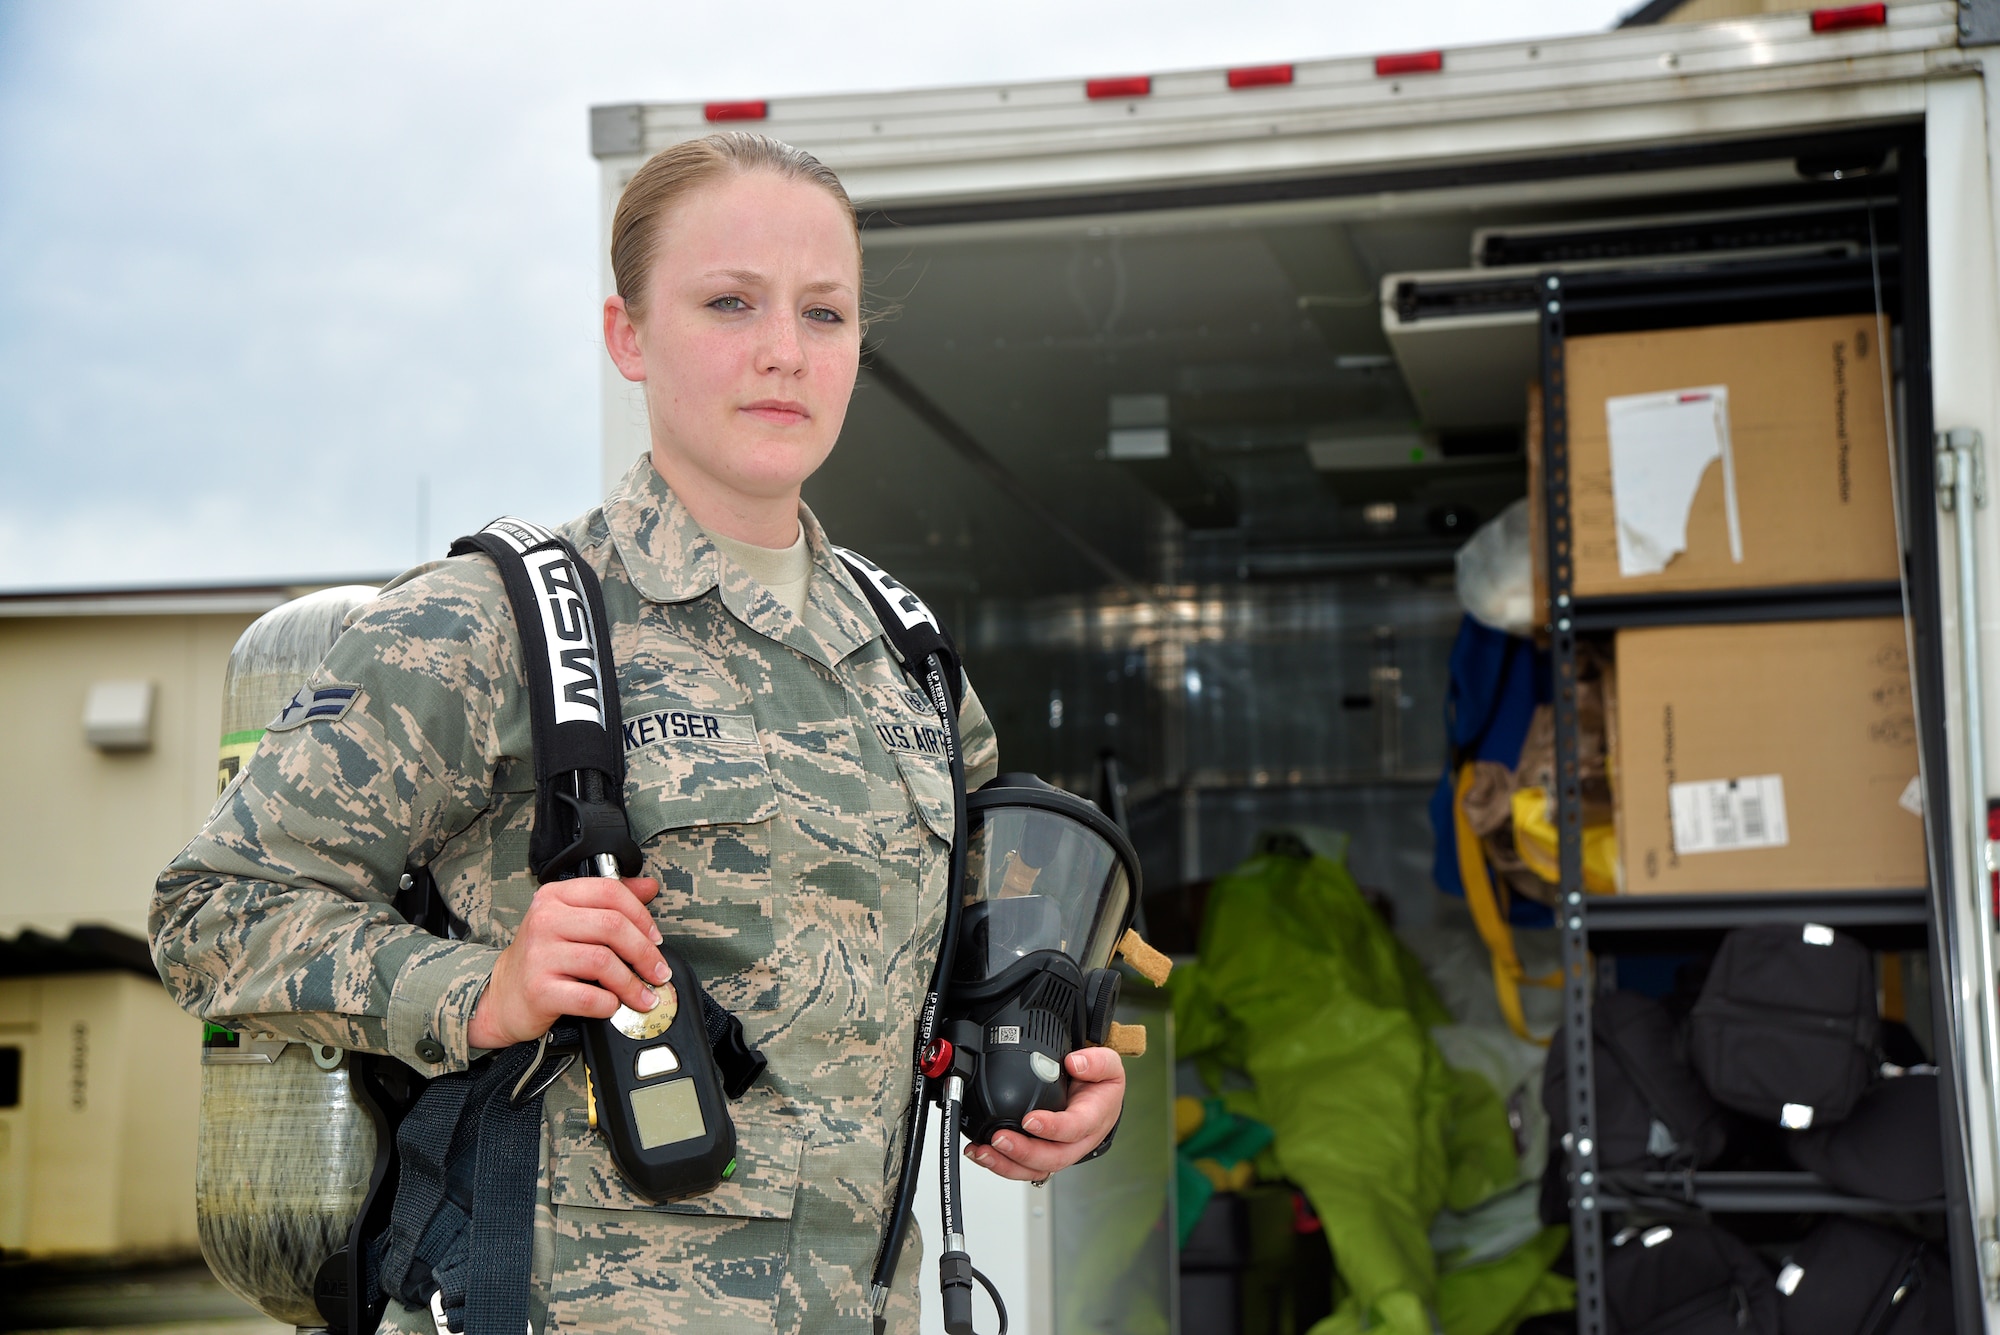 U.S. Air Force Airman 1st Class Ann Keyser, stands with her bioenvironmental equipment at Misawa Air Base, Japan, June, 2, 2015. Ann was selected as Misawa's Wild Weasel of the Week for her dedication to promoting the health and well-being of all Air Force personnel and ensuring workers in all environments are protected from any hazards they may come in contact with. (U.S. Air Force photo by Senior Airman Jose L. Hernandez-Domitilo/Released)